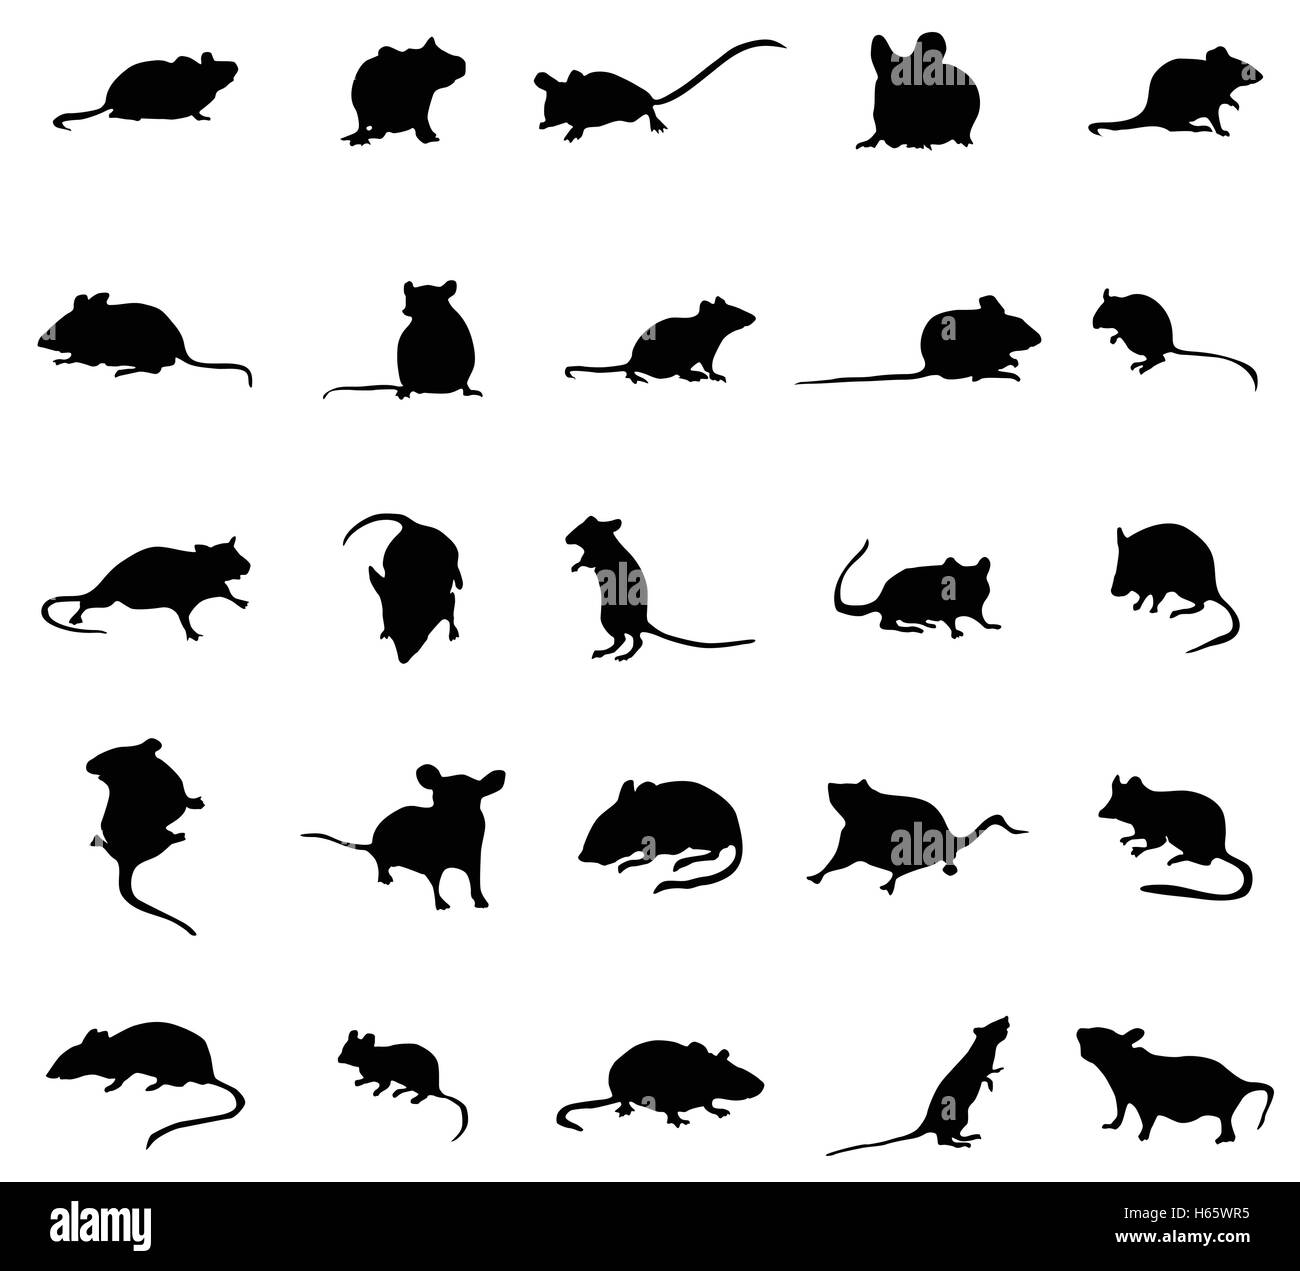 Mouse silhouettes set Stock Vector